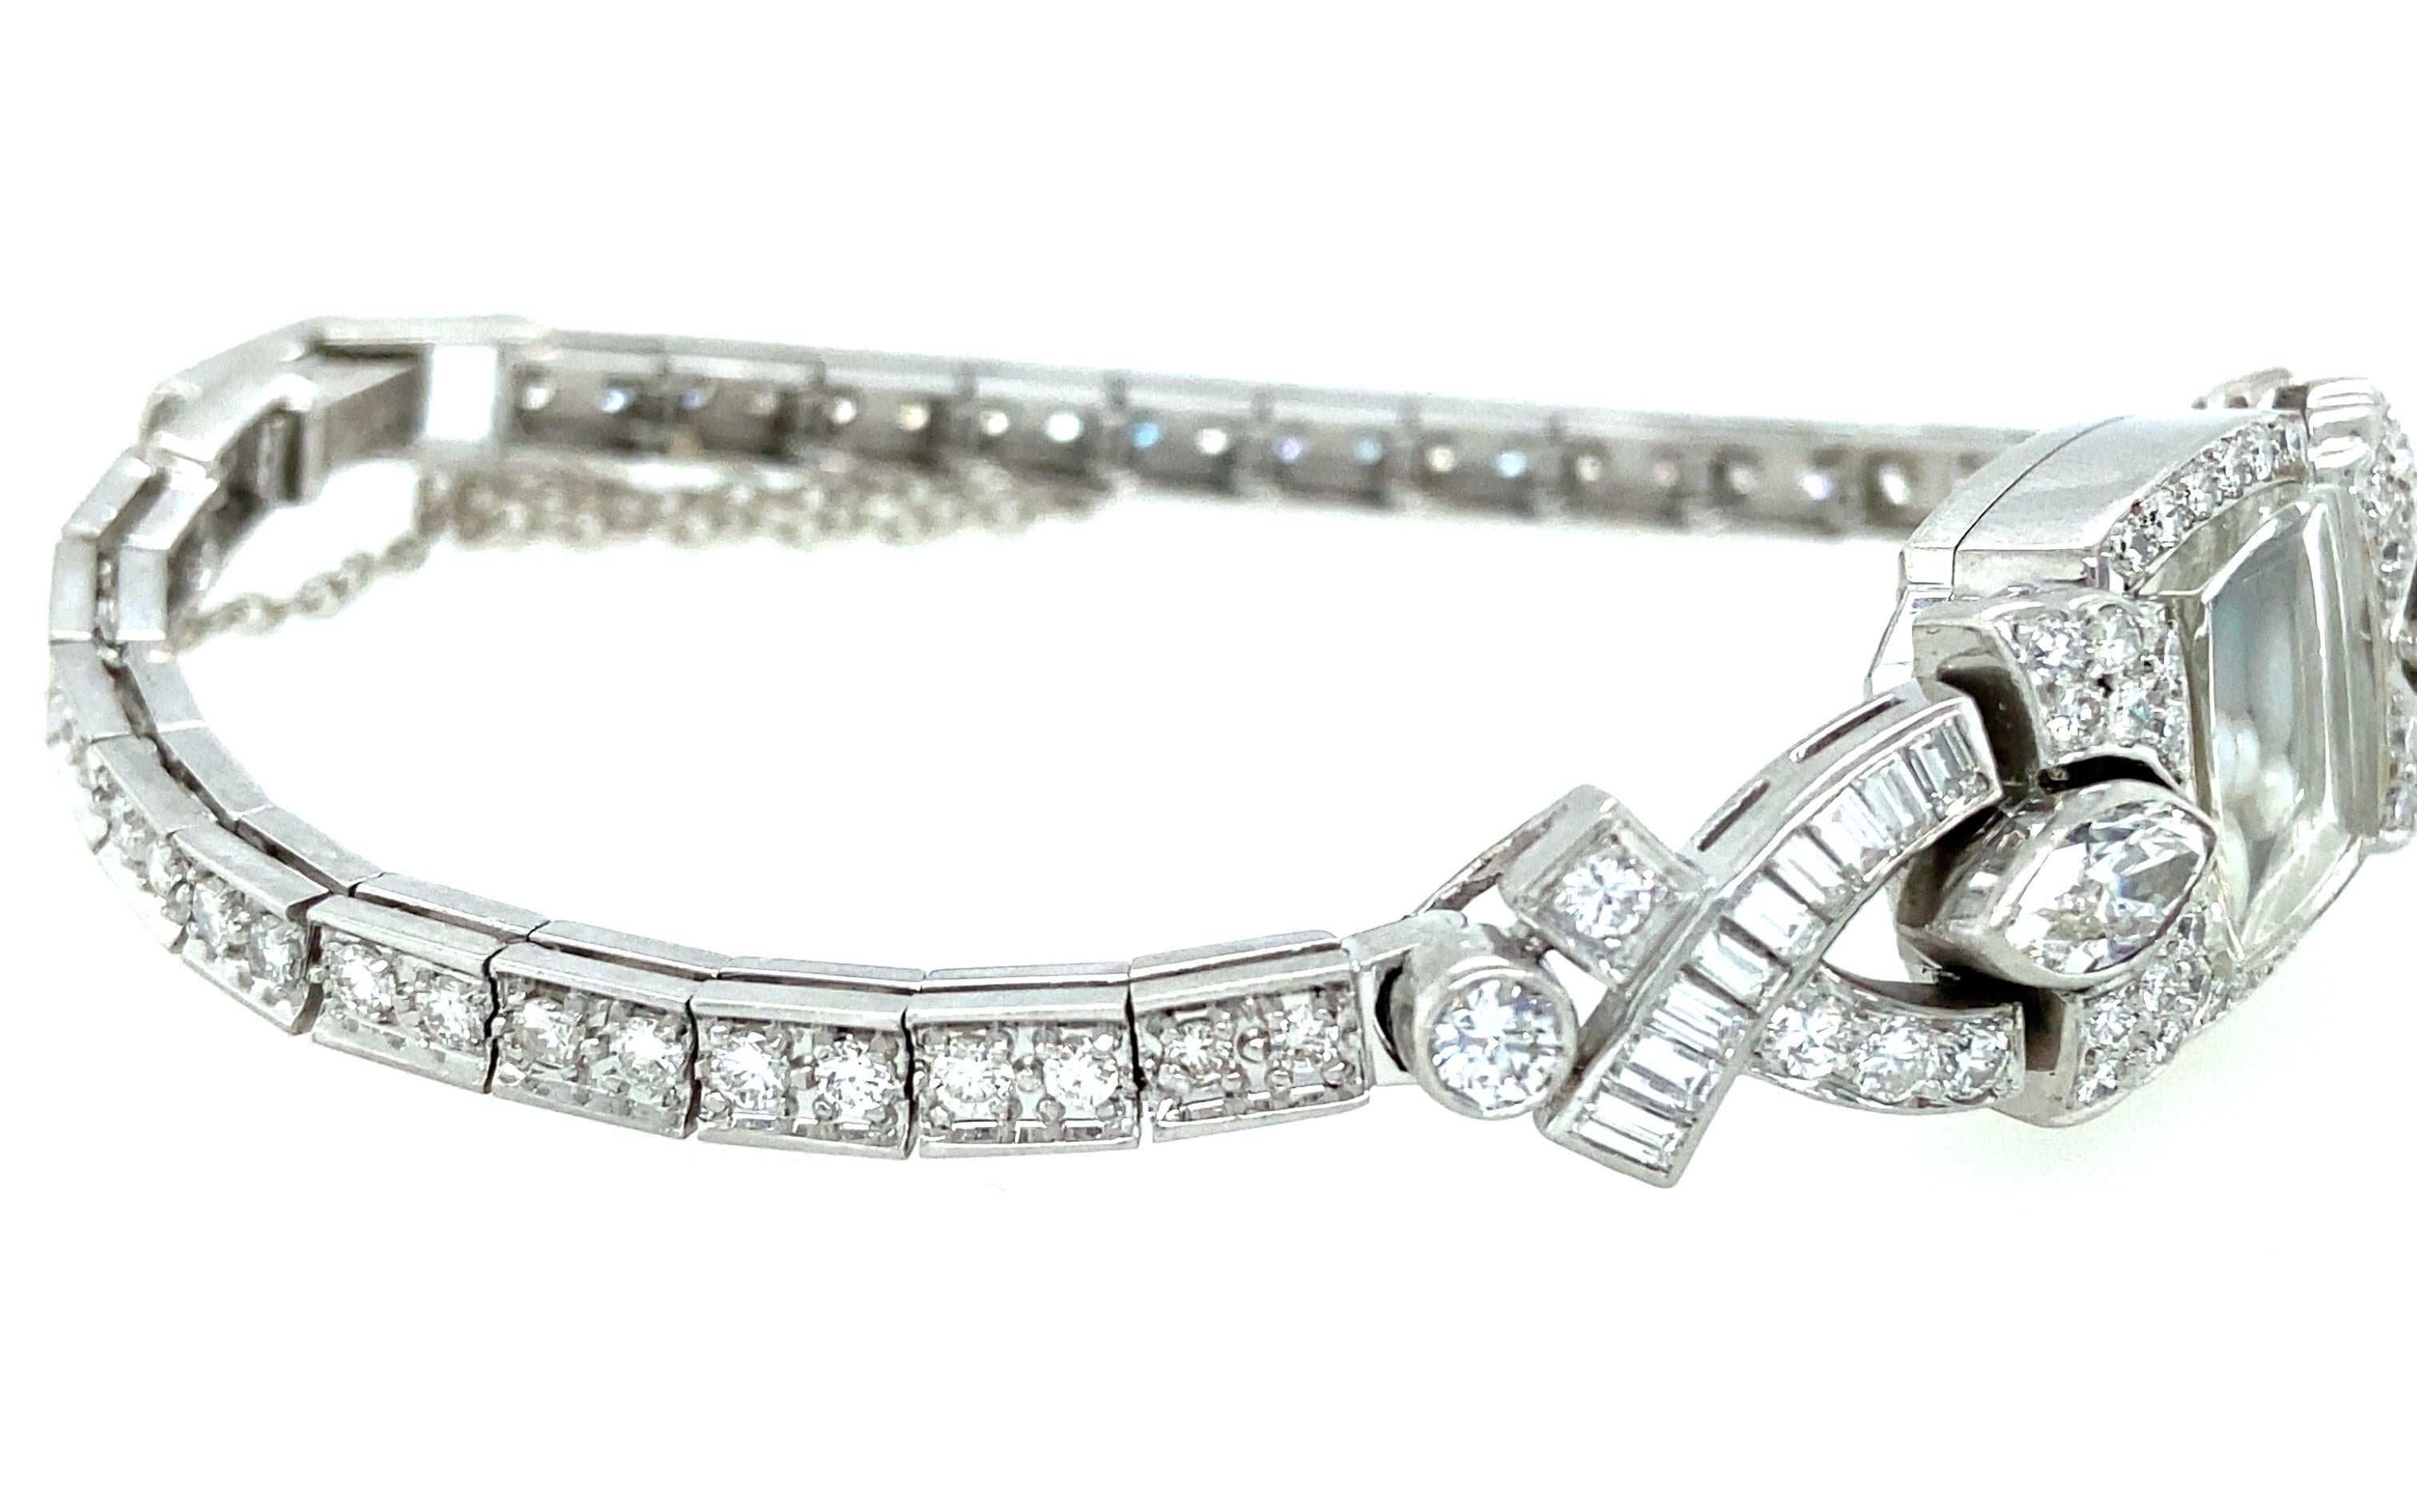 Marquise Cut Platinum Diamond, Opal, and Pearl Shake Bracelet Reimagined 1950s Watch